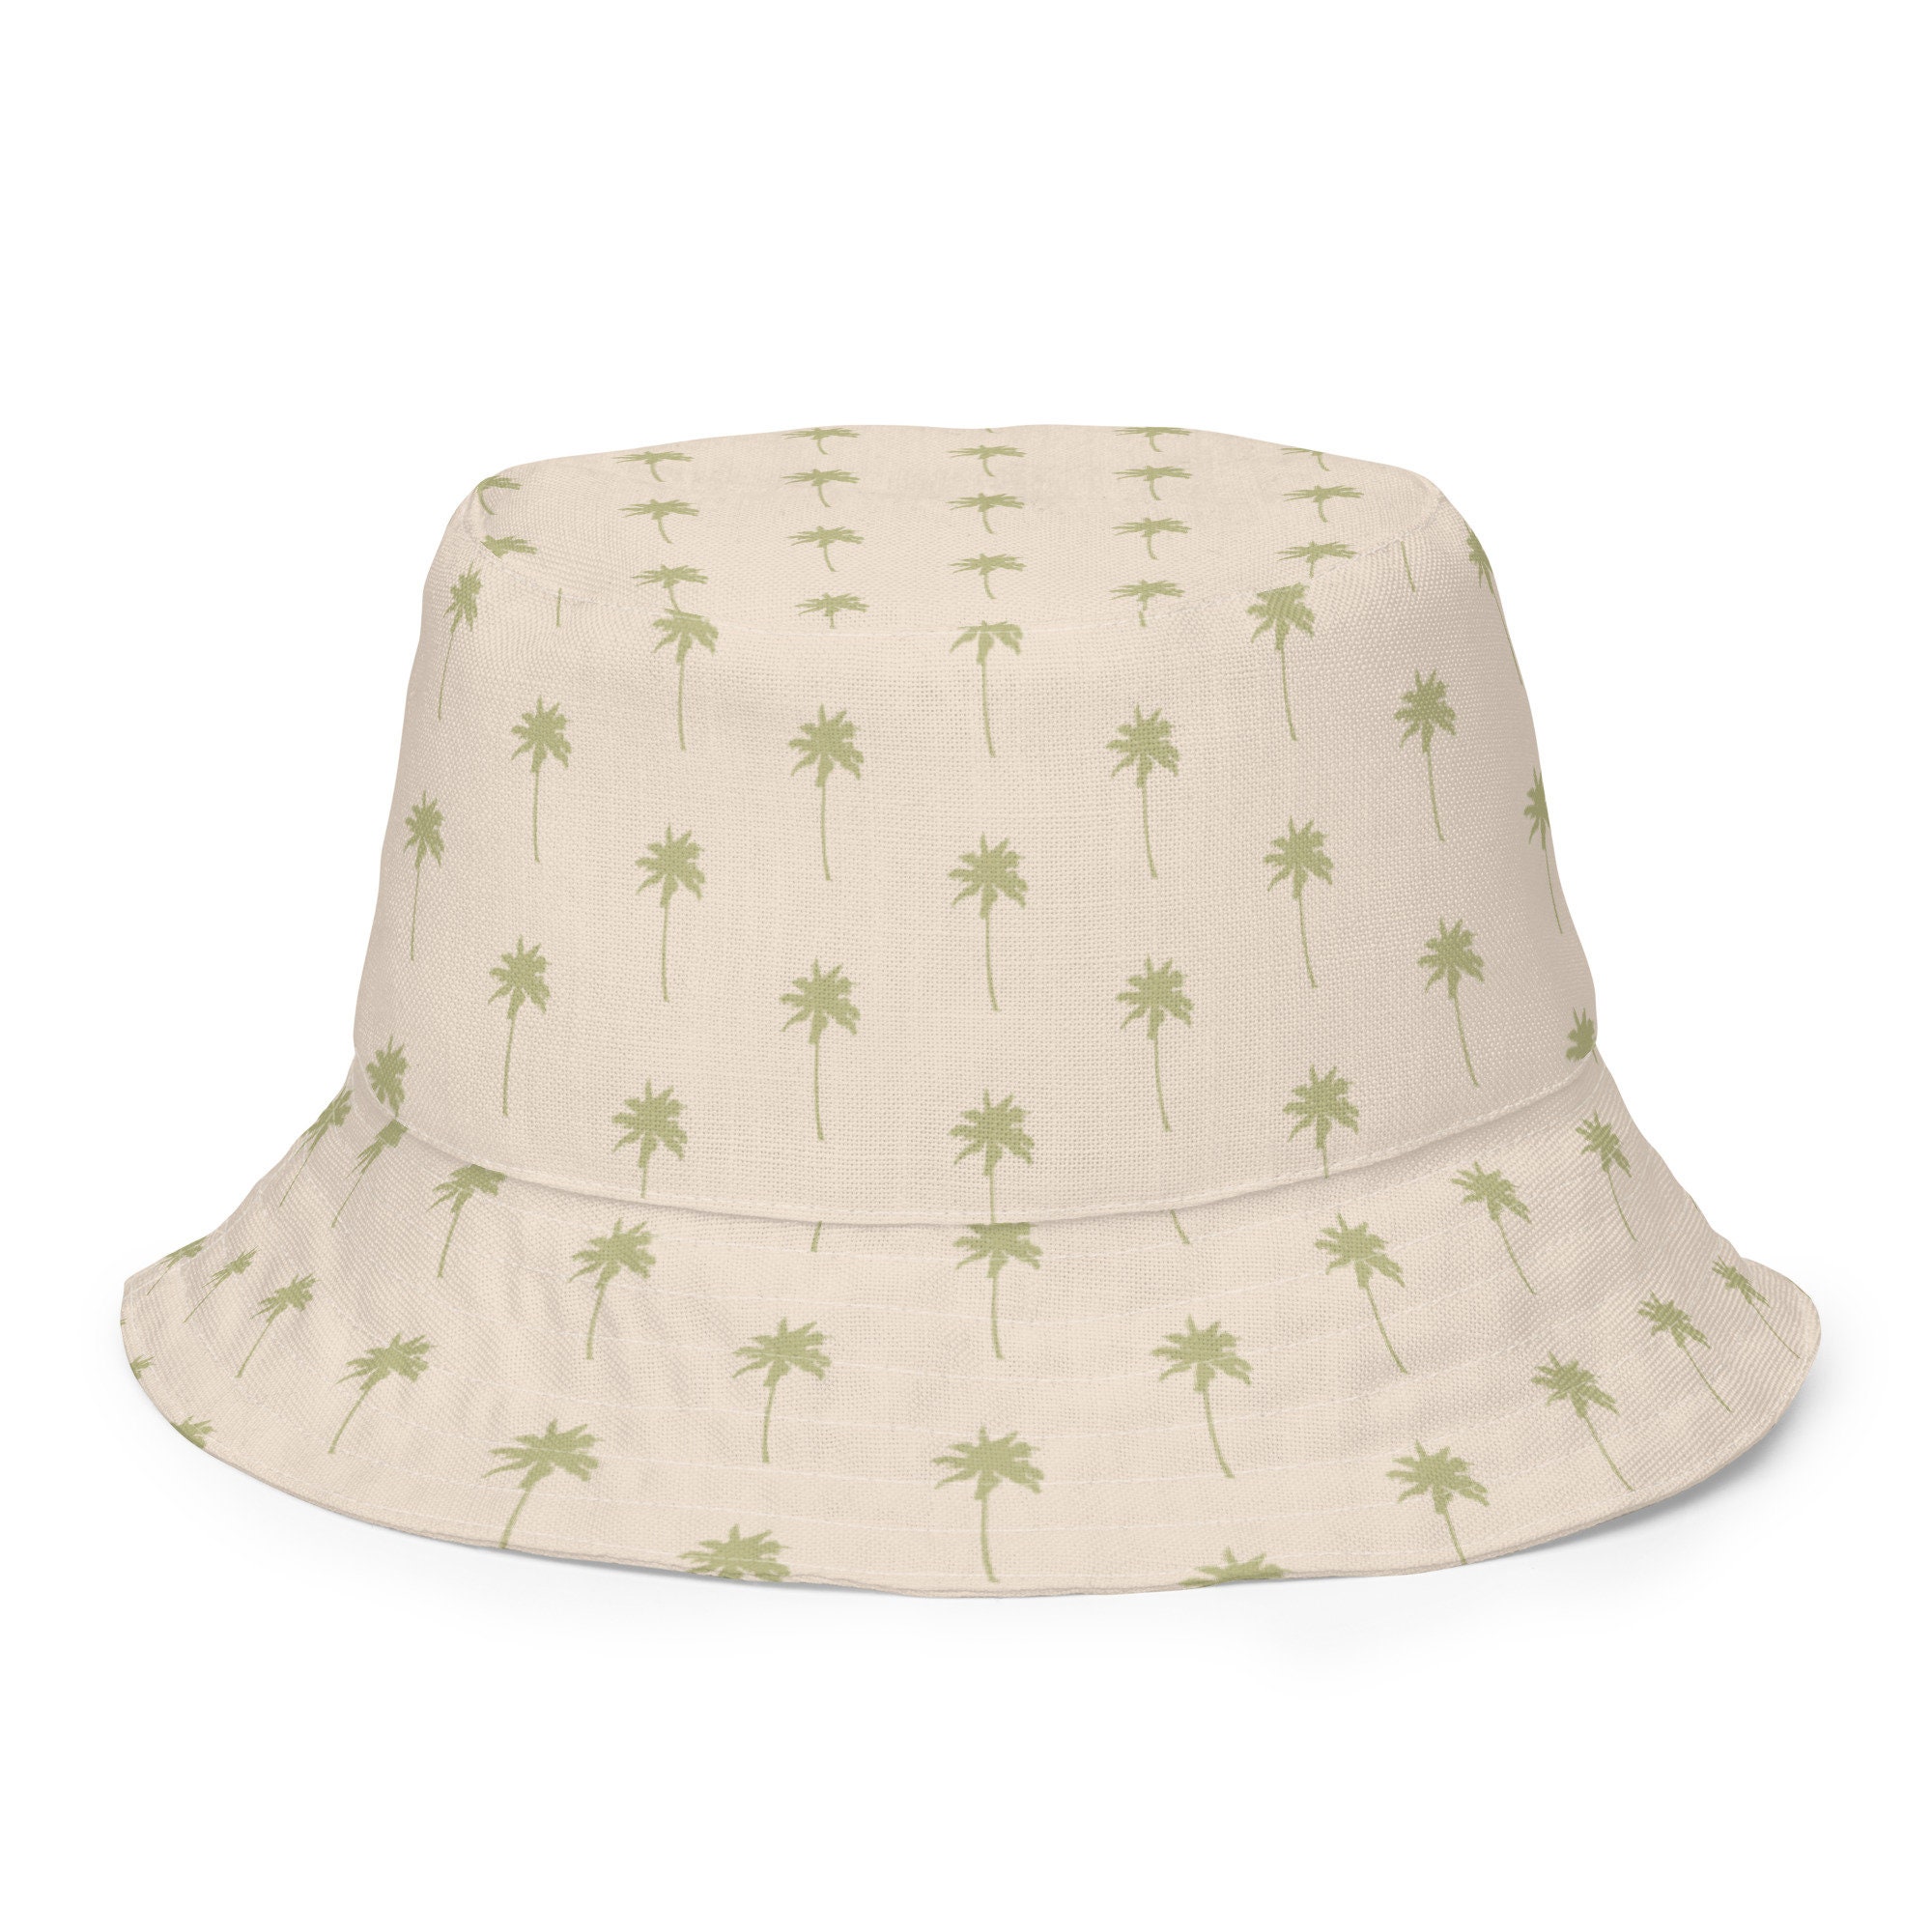 Reversible Beach Palm Tree Bucket Hat two in One - Etsy